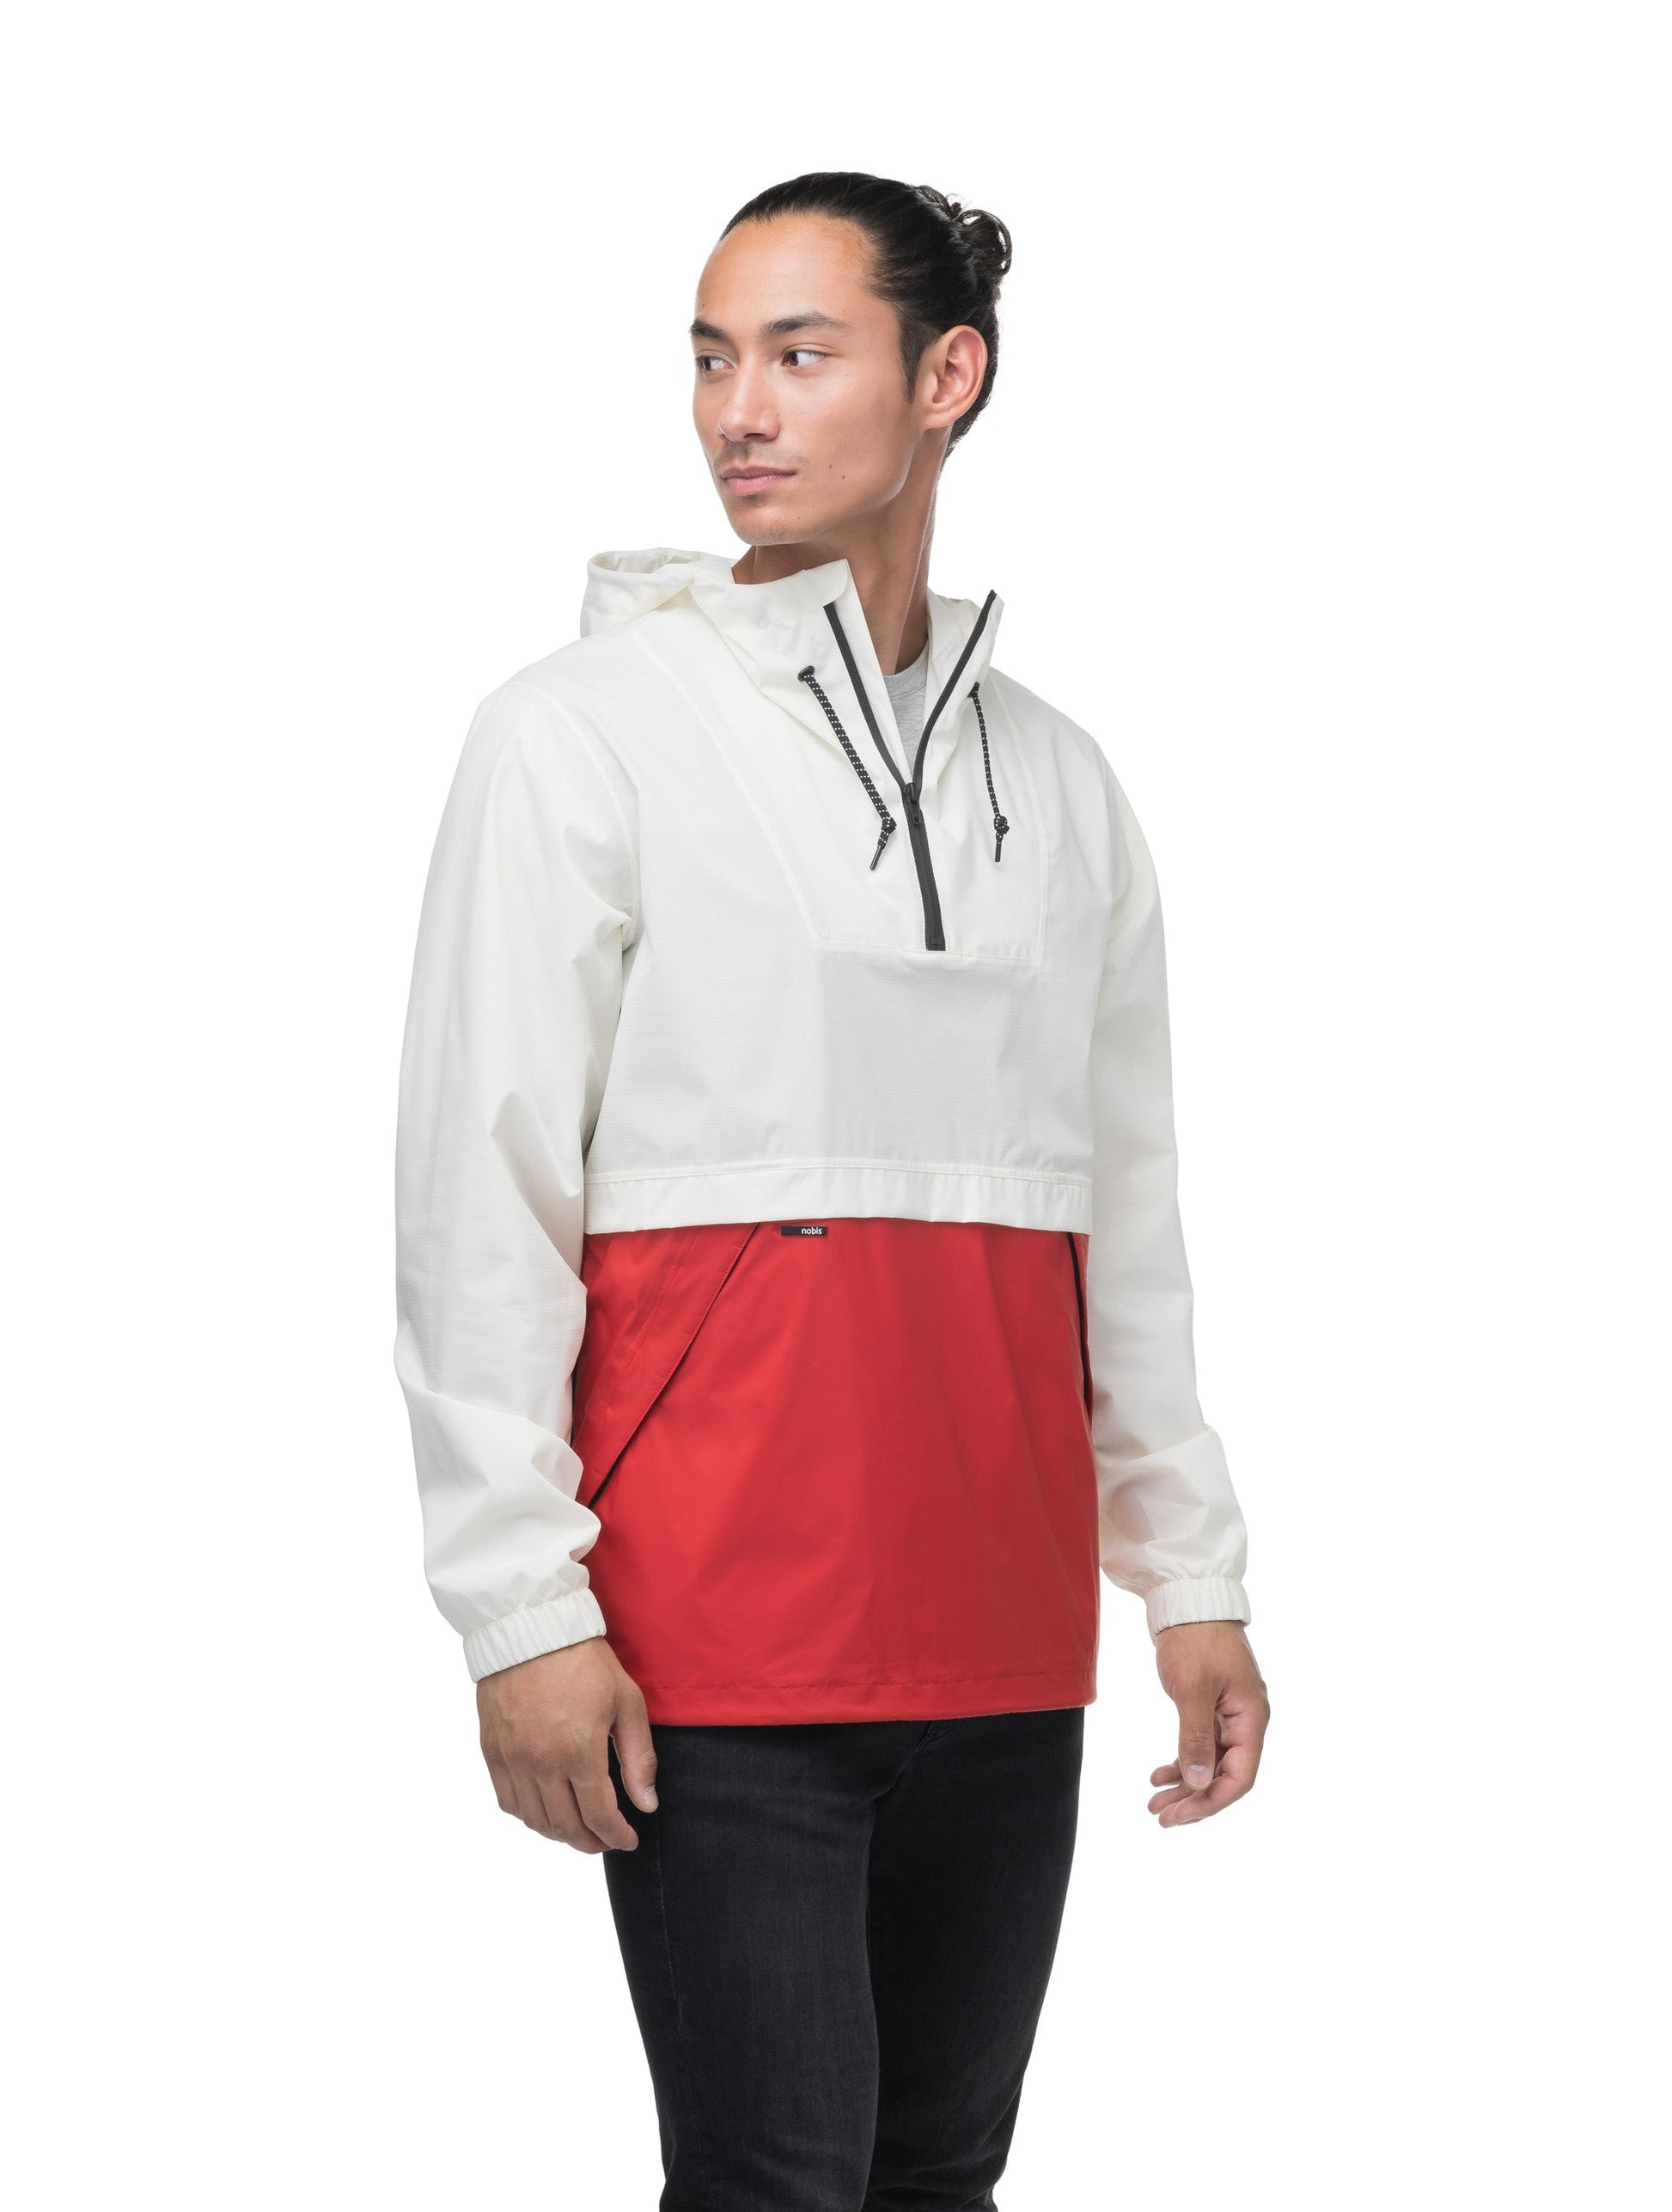 Men's hip length hooded pullover anorak with zipper at collar in Chalk/Vermillion